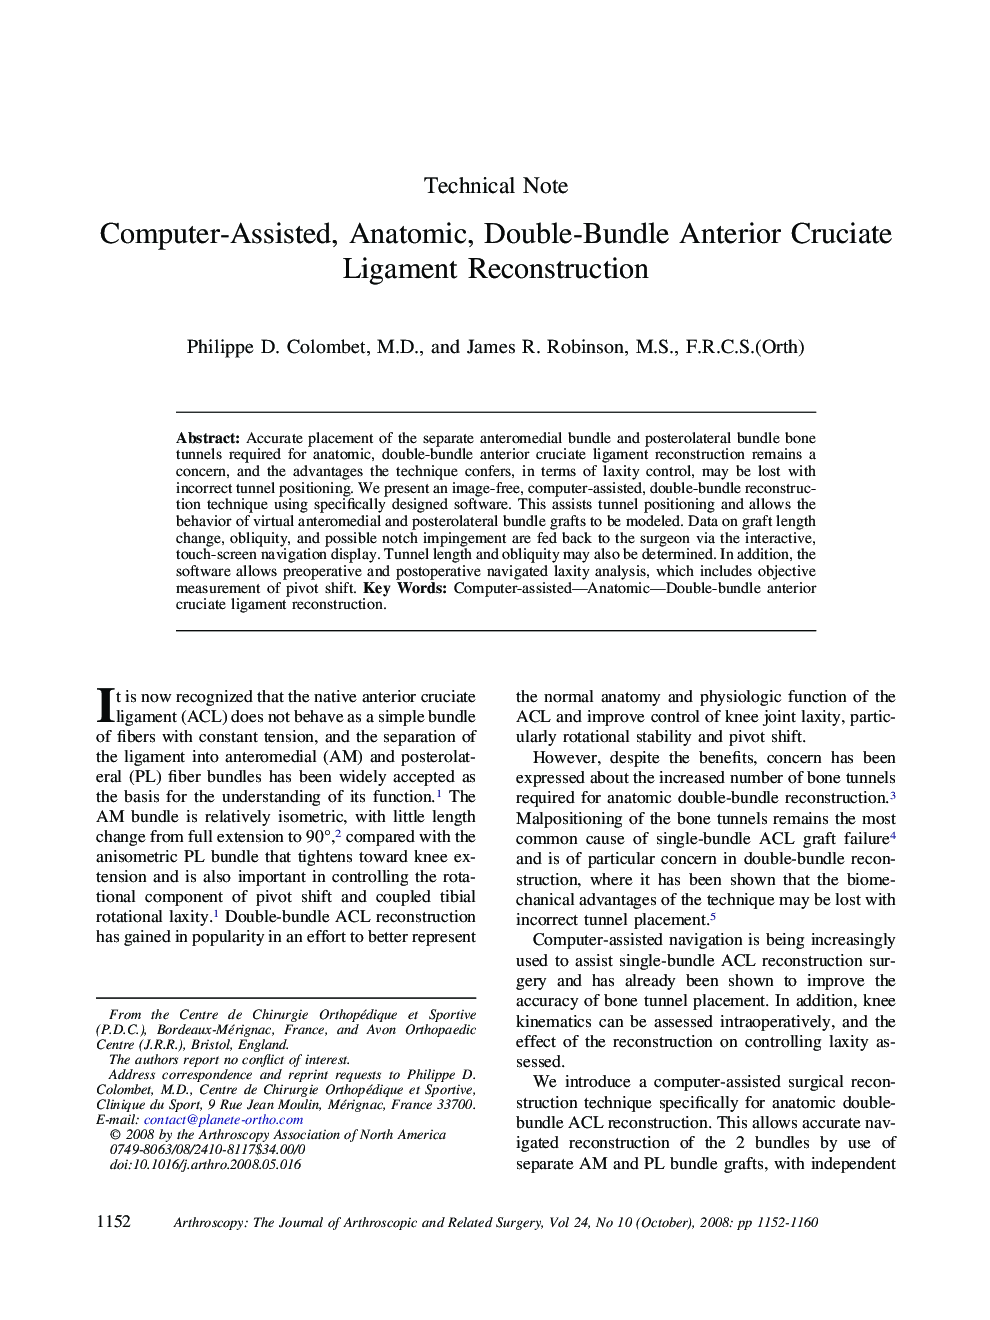 Computer-Assisted, Anatomic, Double-Bundle Anterior Cruciate Ligament Reconstruction 